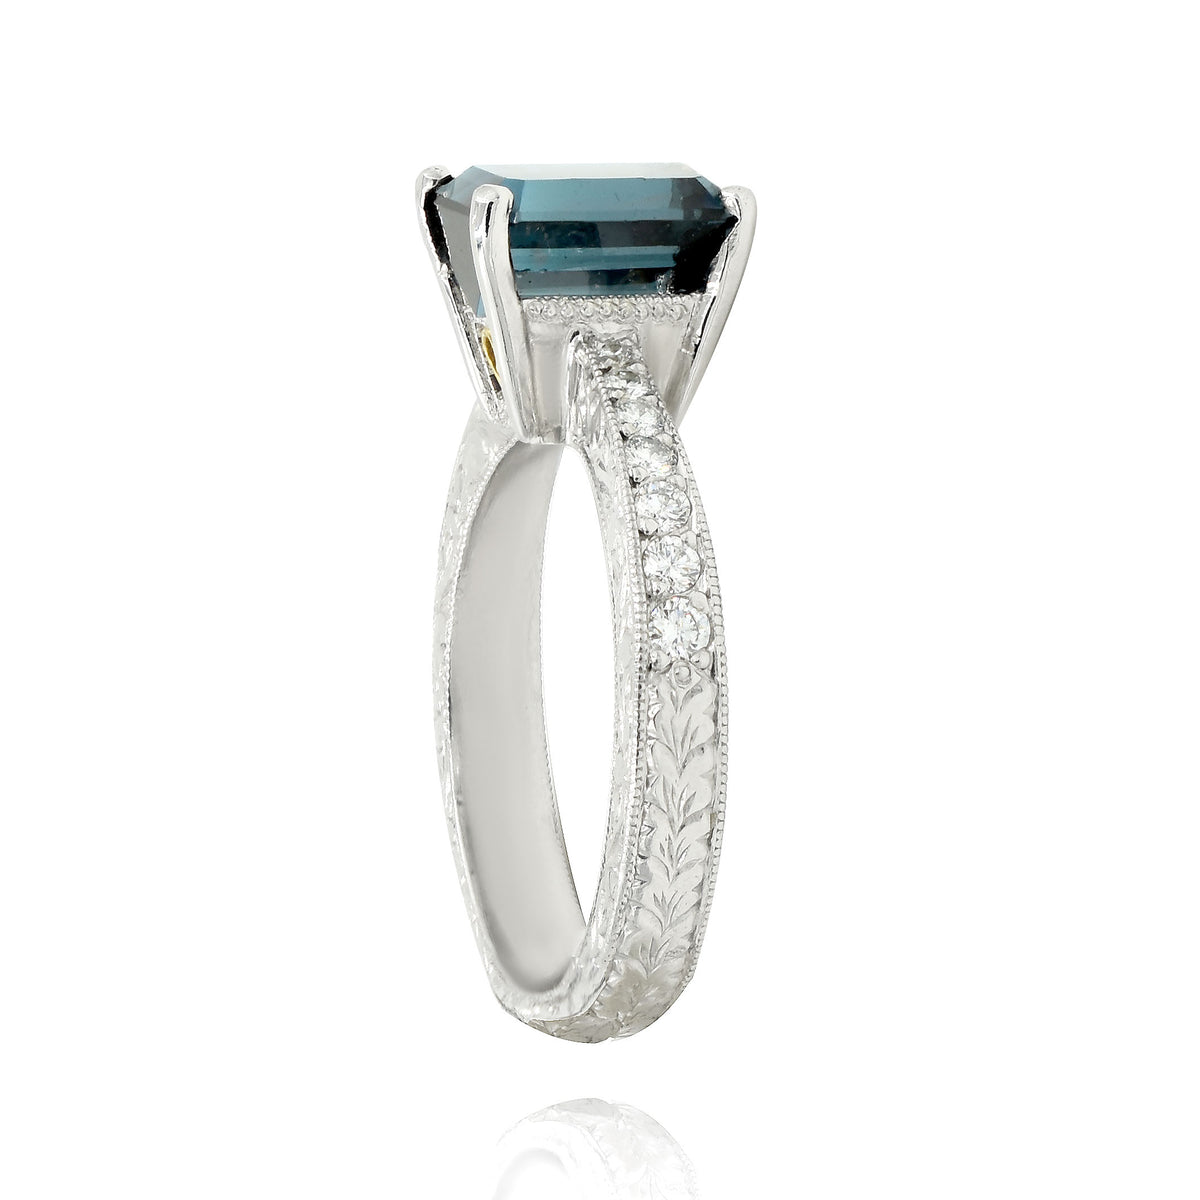 Platinum Beaudry Ring with an Indicolite Tourmaline